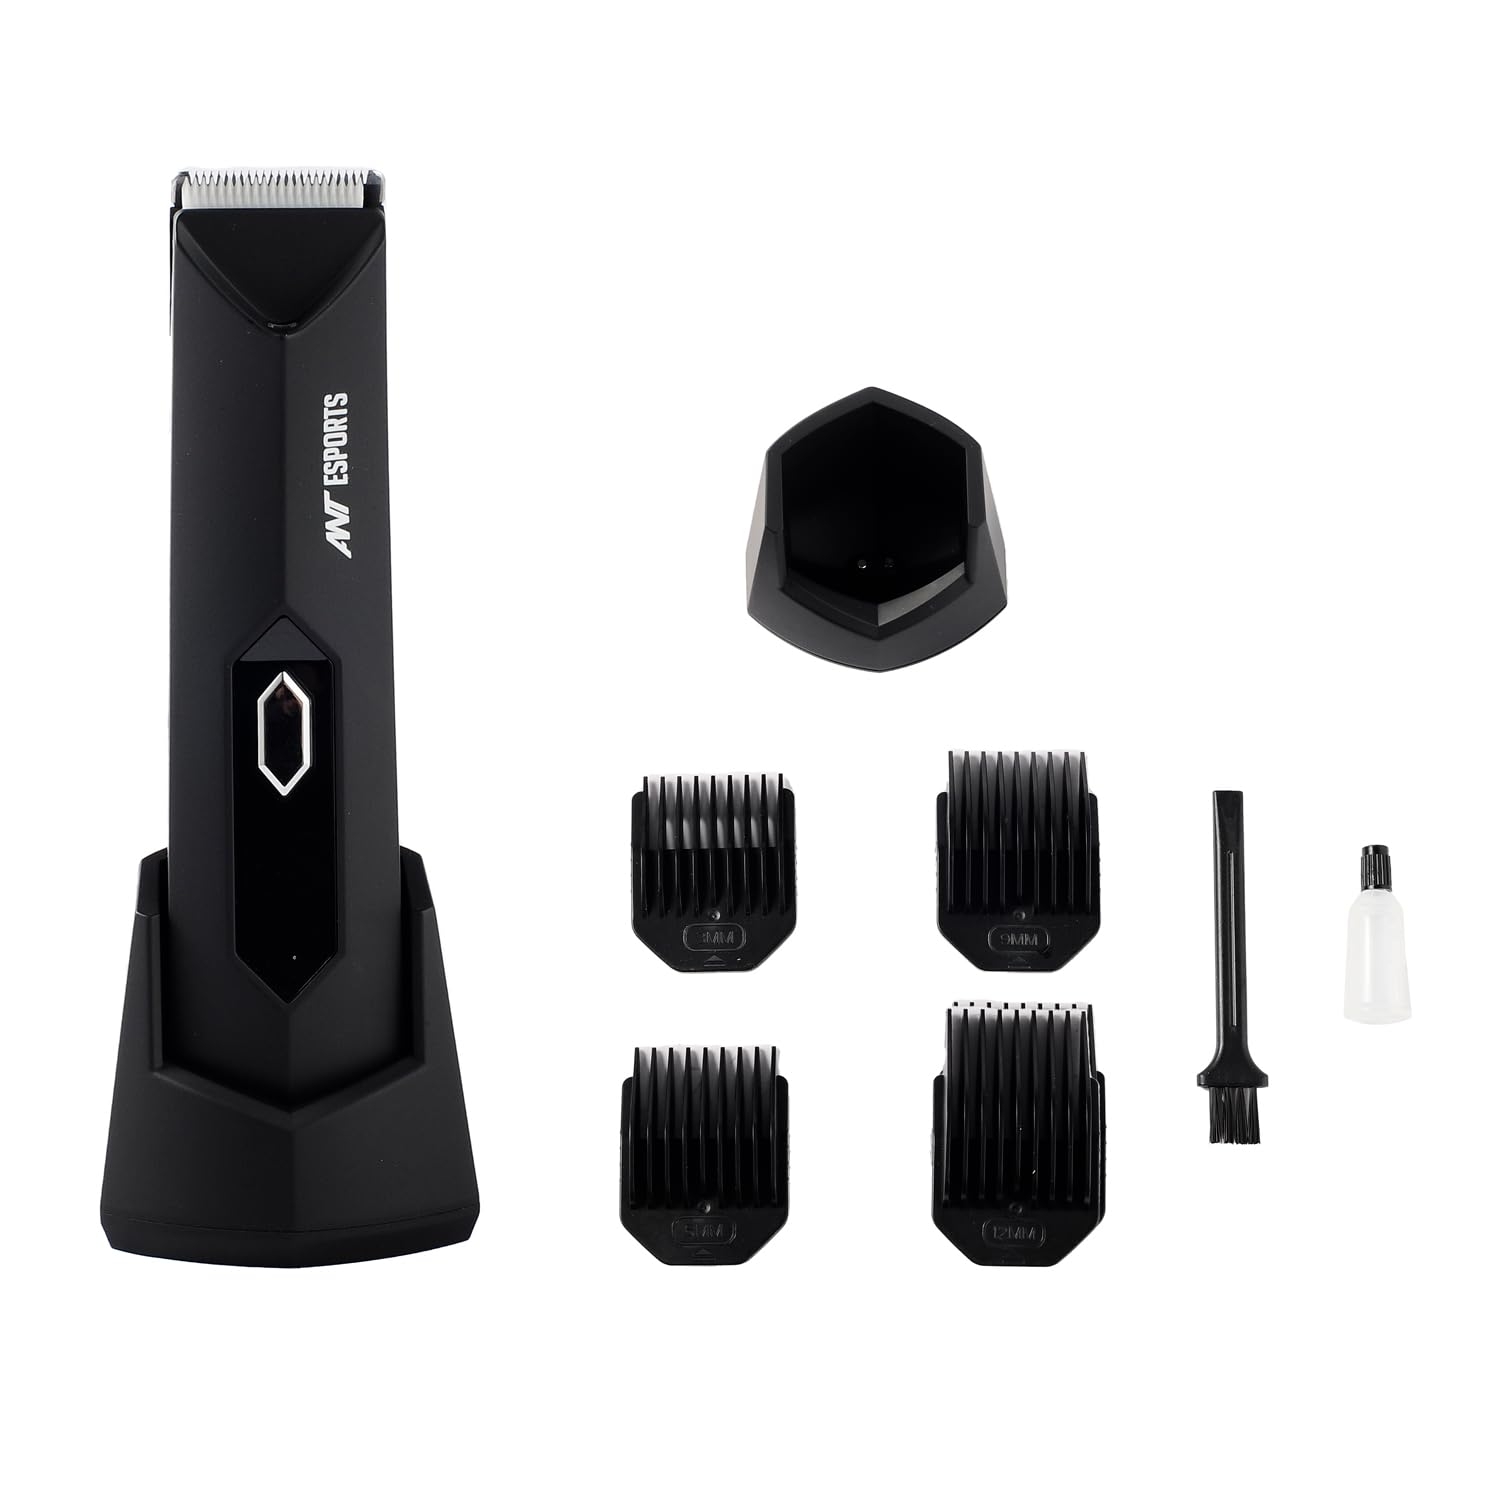 Ant Esports MGK1950 Body Hair Trimmer | LED Display, IPX7, Male Hygiene Grooming Razor | USB Recharge Dock, Ceramic Blade Head Trimmers